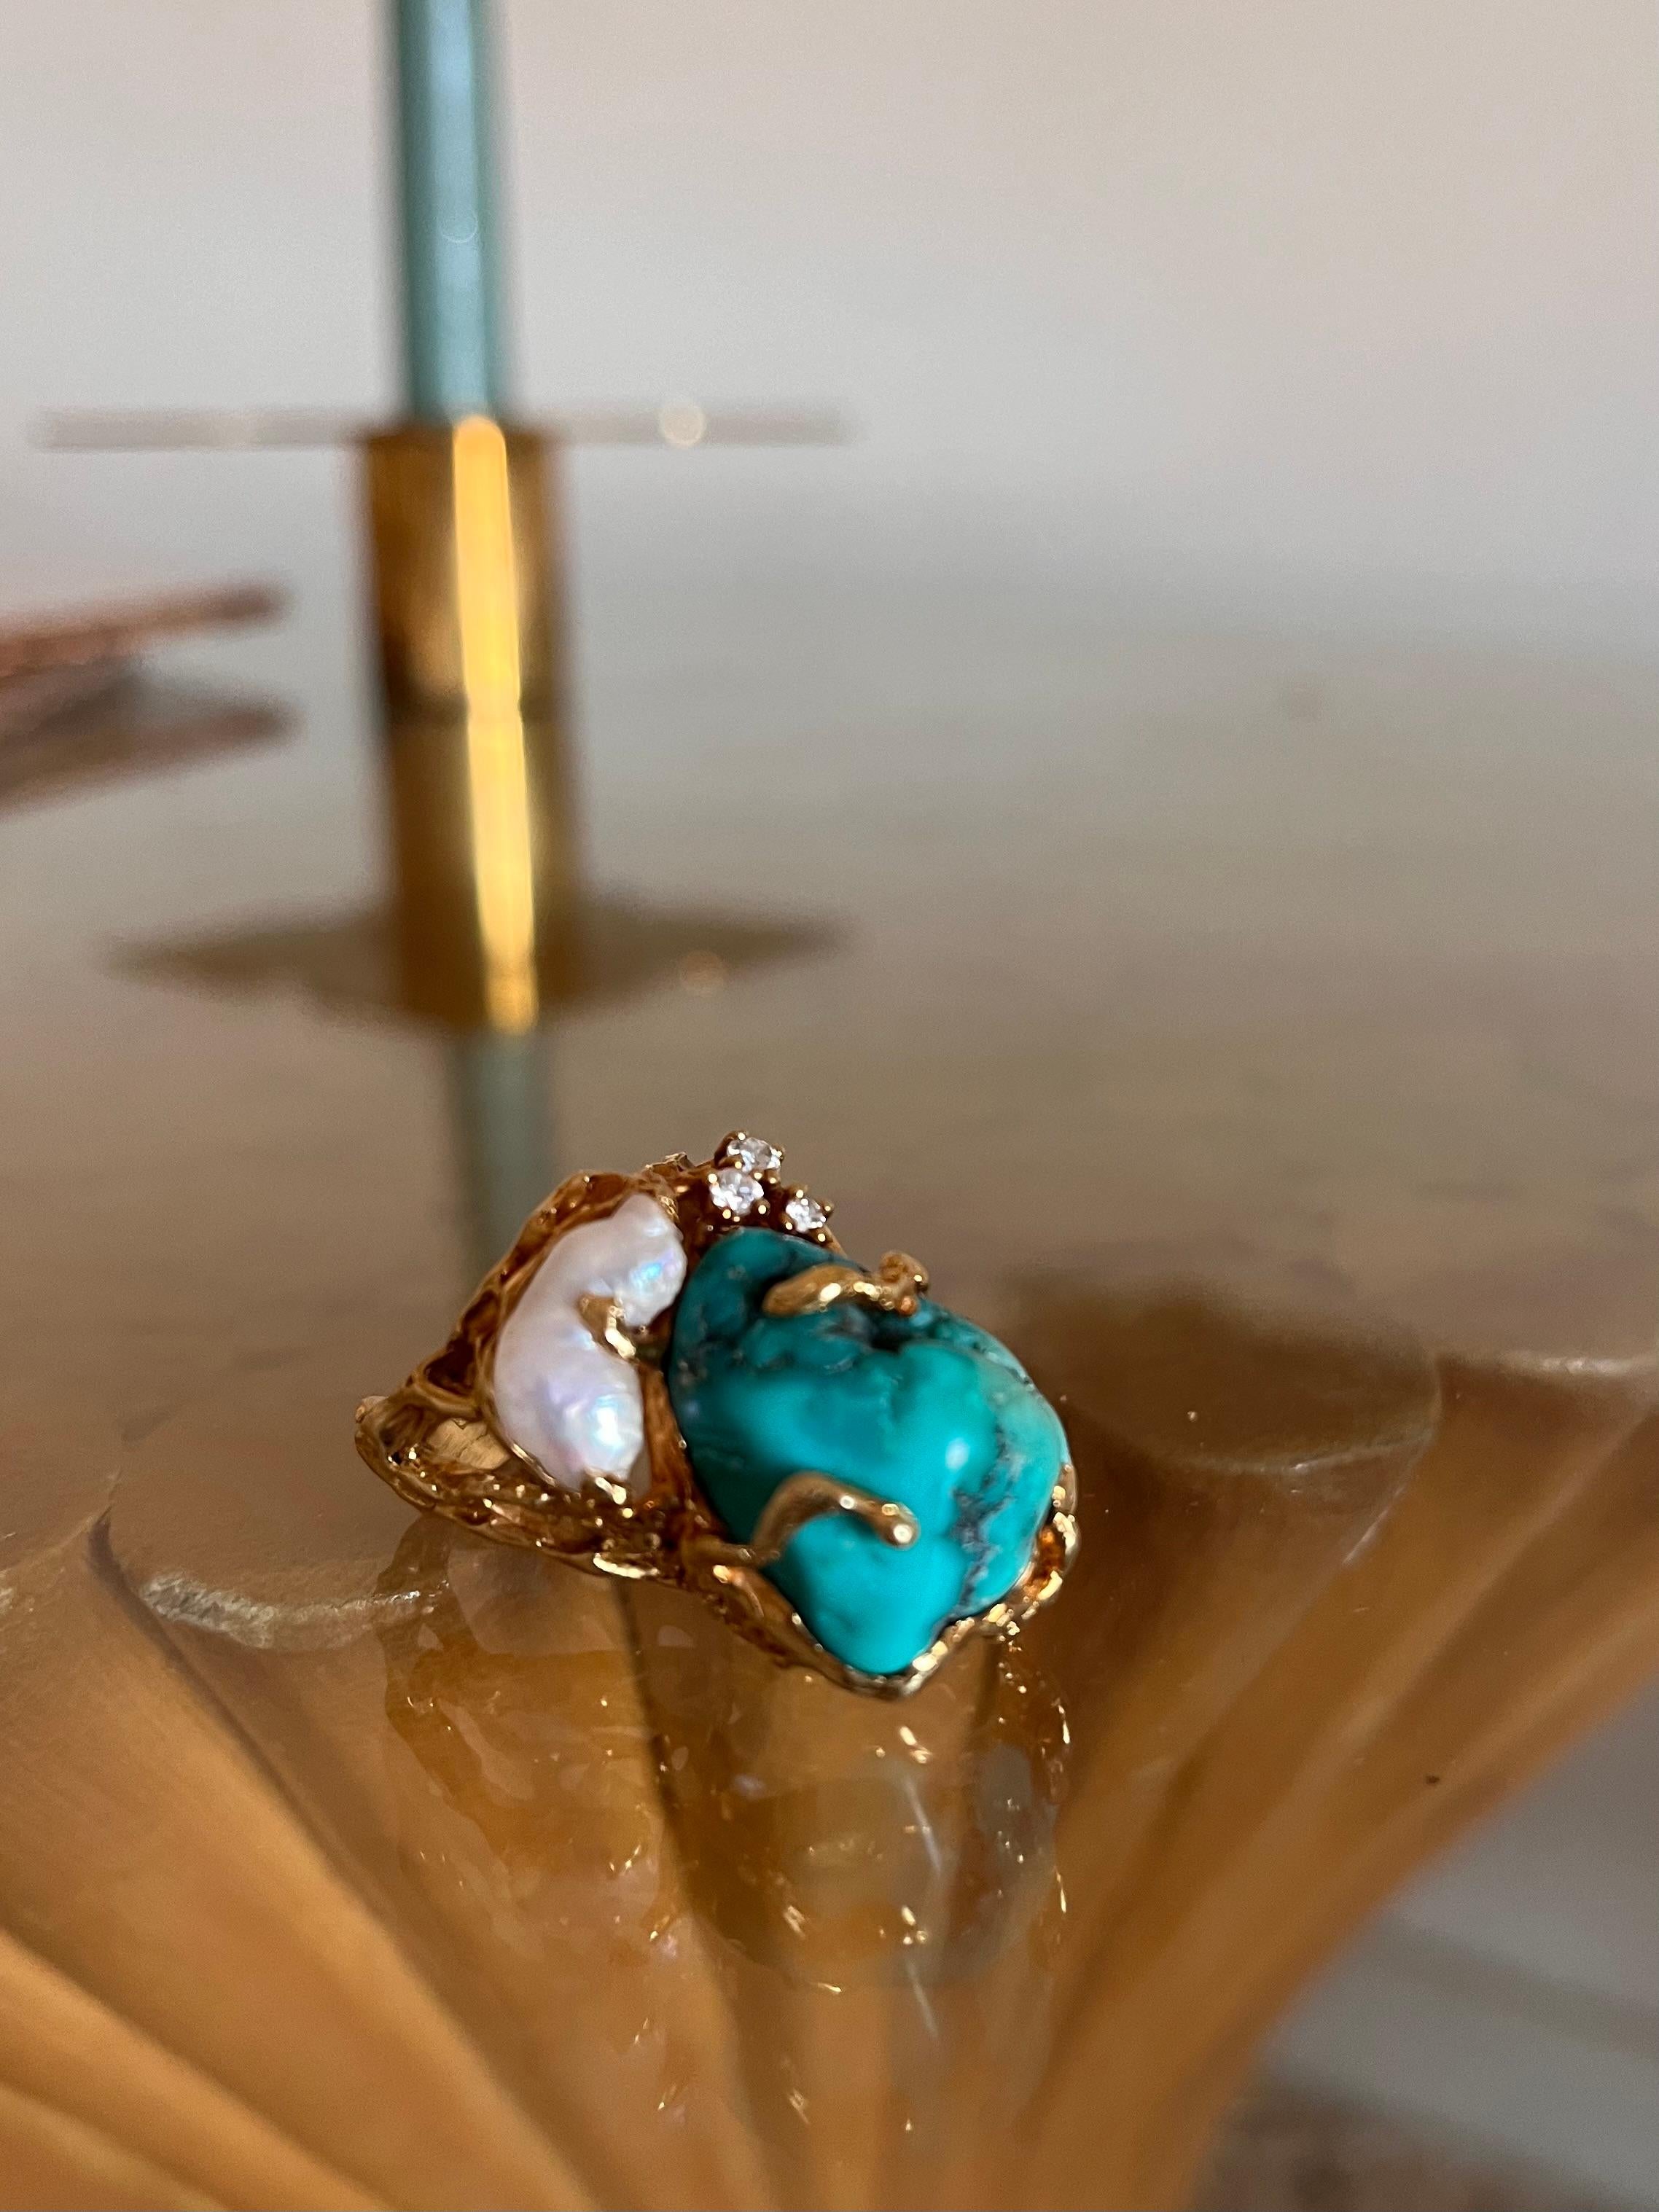 Spectacular Sculptural Ring made with a rough cut Turquoise cabochon, a baroque pearl and diamonds. Unique piece exhibited in Kremlin on the 80s

One of the most innovative jewelers of his time, Gilbert Albert was known for using unusual materials